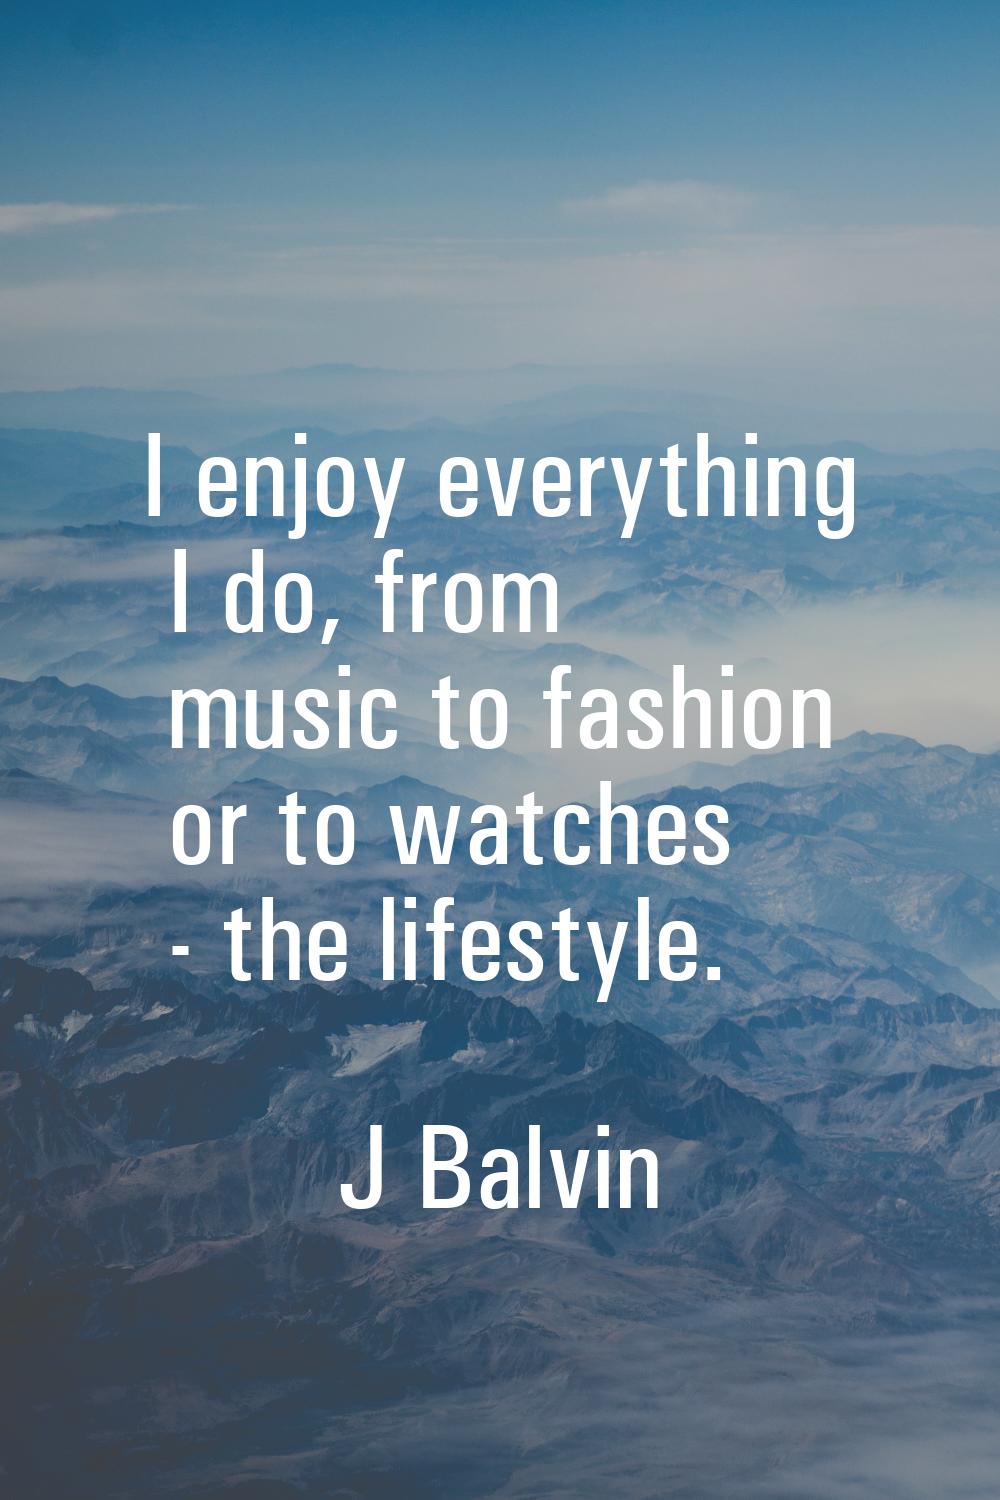 I enjoy everything I do, from music to fashion or to watches - the lifestyle.